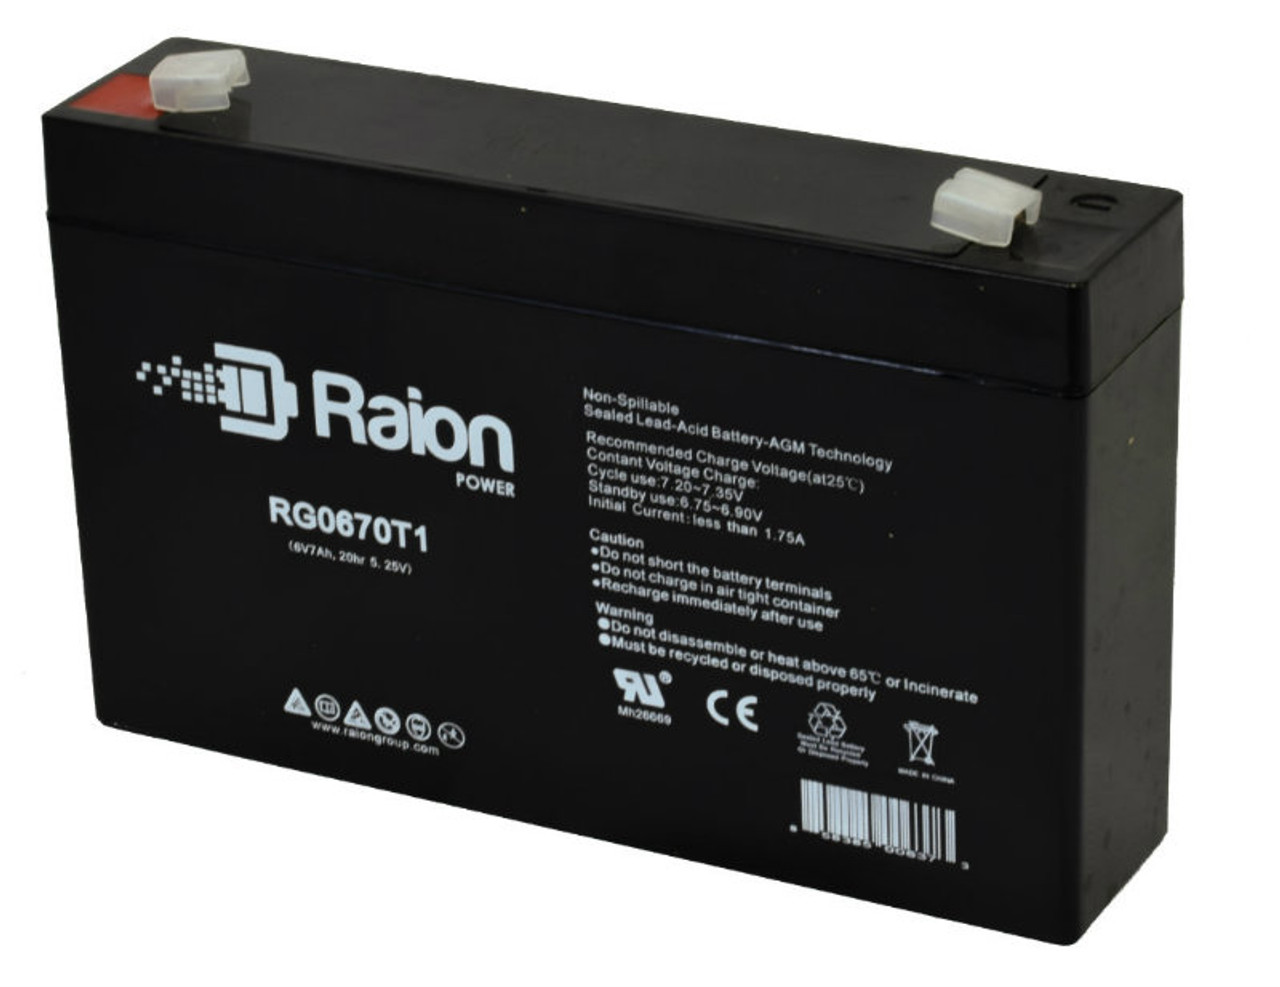 Raion Power 6V 7Ah Replacement Ride-On Toy Battery Cartridge for Best Choice Products SKY4620 Kids Ride-On Car Truck Toy - Black